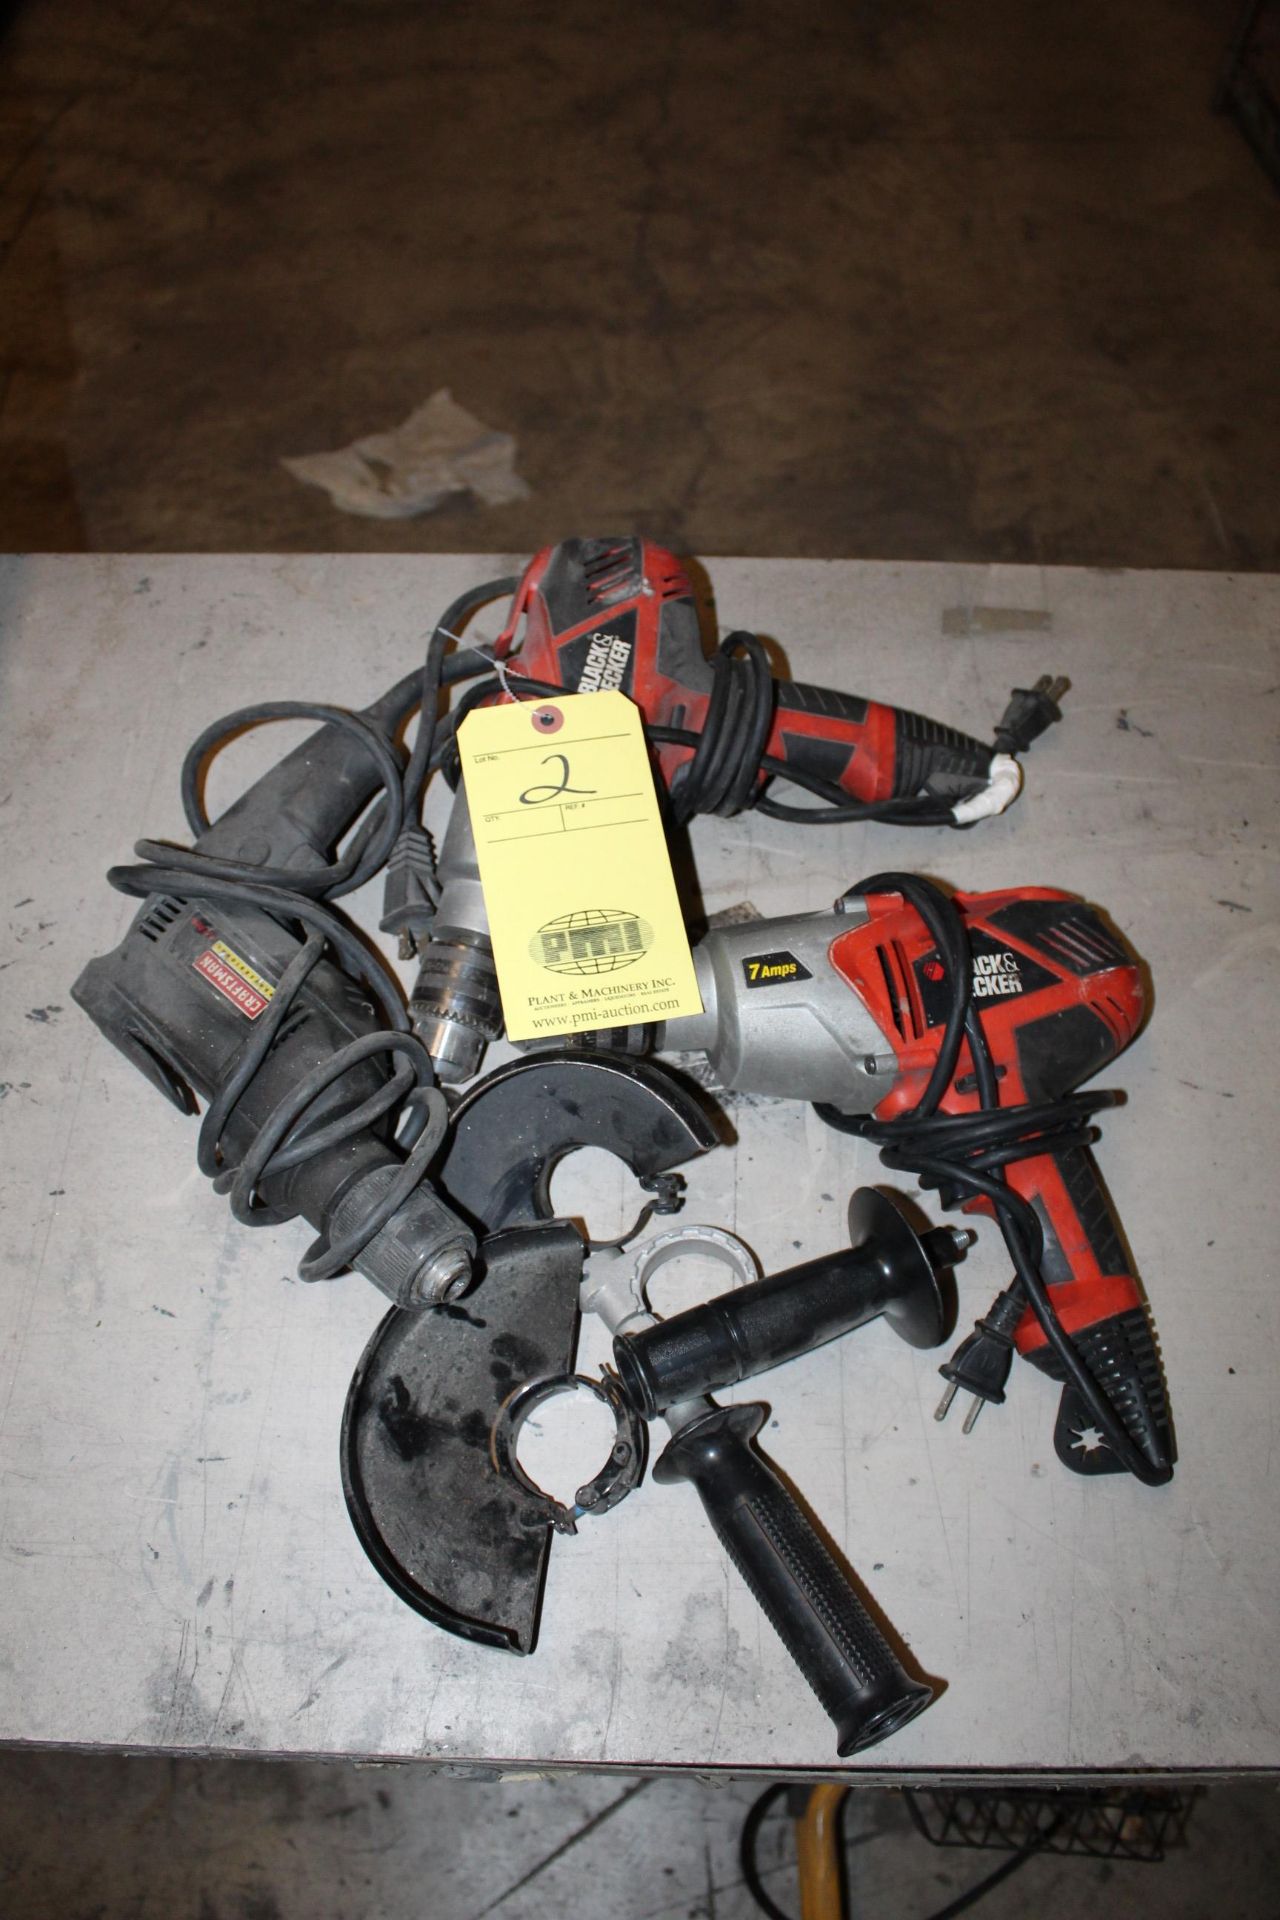 LOT OF ELECTRIC DRILLS: (2) Black & Decker & (1) Craftsman (Located at: Accurate, Inc., 1200 East